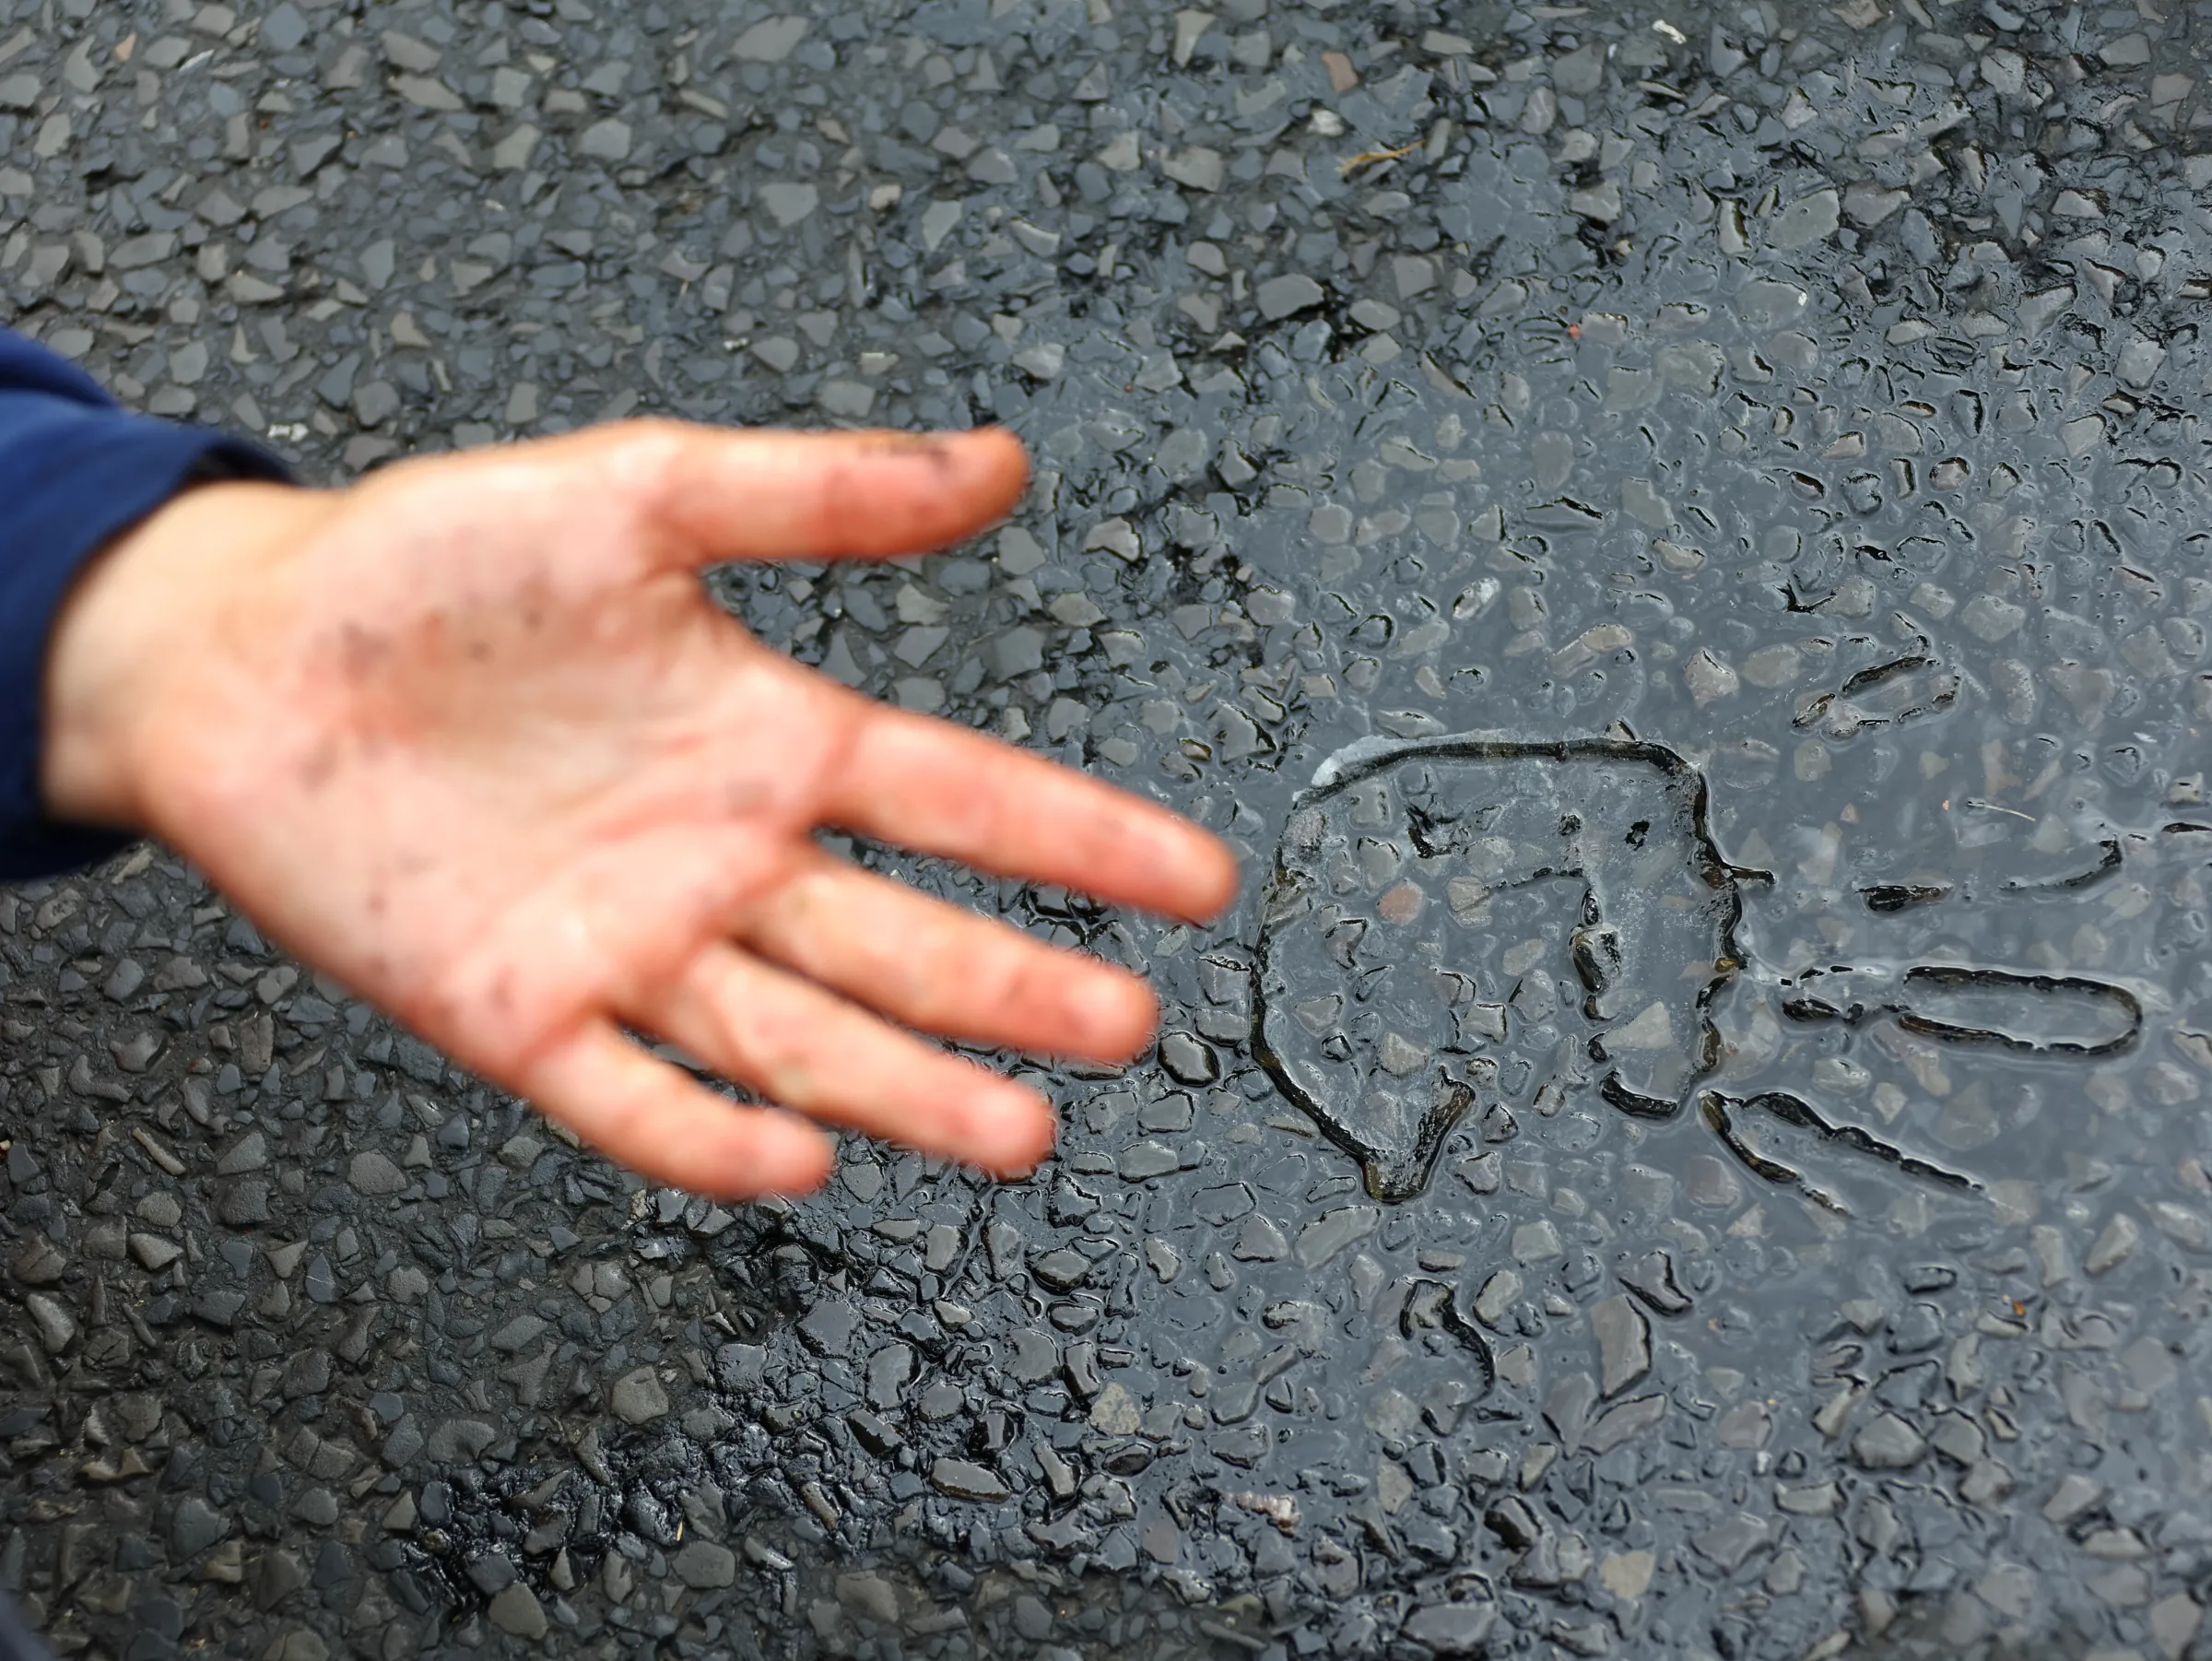 The shape of the hand is seen on the glue on the road as "Letzte Generation" (Last Generation) activist block a road under the slogan "Let's stop the fossil madness!" for an end to fossil fuels and against oil drilling in the North Sea, in Berlin, Germany,